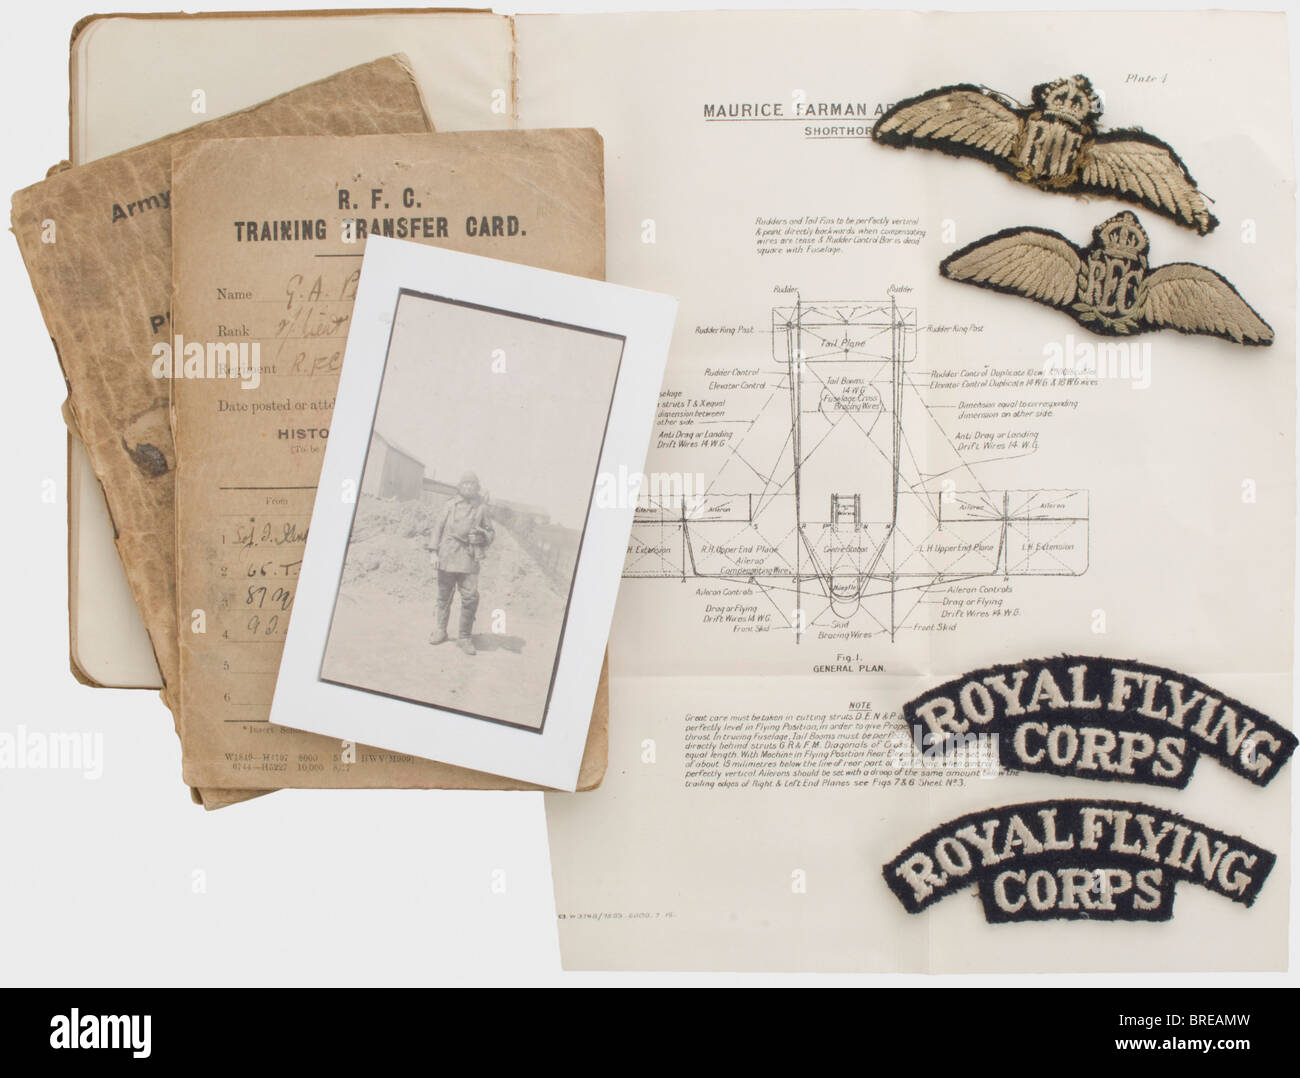 E. George Archibald Peskett, a flight log, papers and insignia of the English pilot Log book with entries from June 1917 to December 1918 while with the School of Instruction RFC, the No. 65 Training Squadron, the 87th Squadron, No. 9 Training Squadron and No. 18 Squadron. Included are the RFC Training Transfer Card and Gunnery Card, as well as a clothing allowance authorization. 'Technical Notes R.F.V.', 1916 edition with technical data and descriptions of common aircraft types (34 pages, 38 tables - rare!). Also a photo of Peskett and a copy of his personnel , Stock Photo